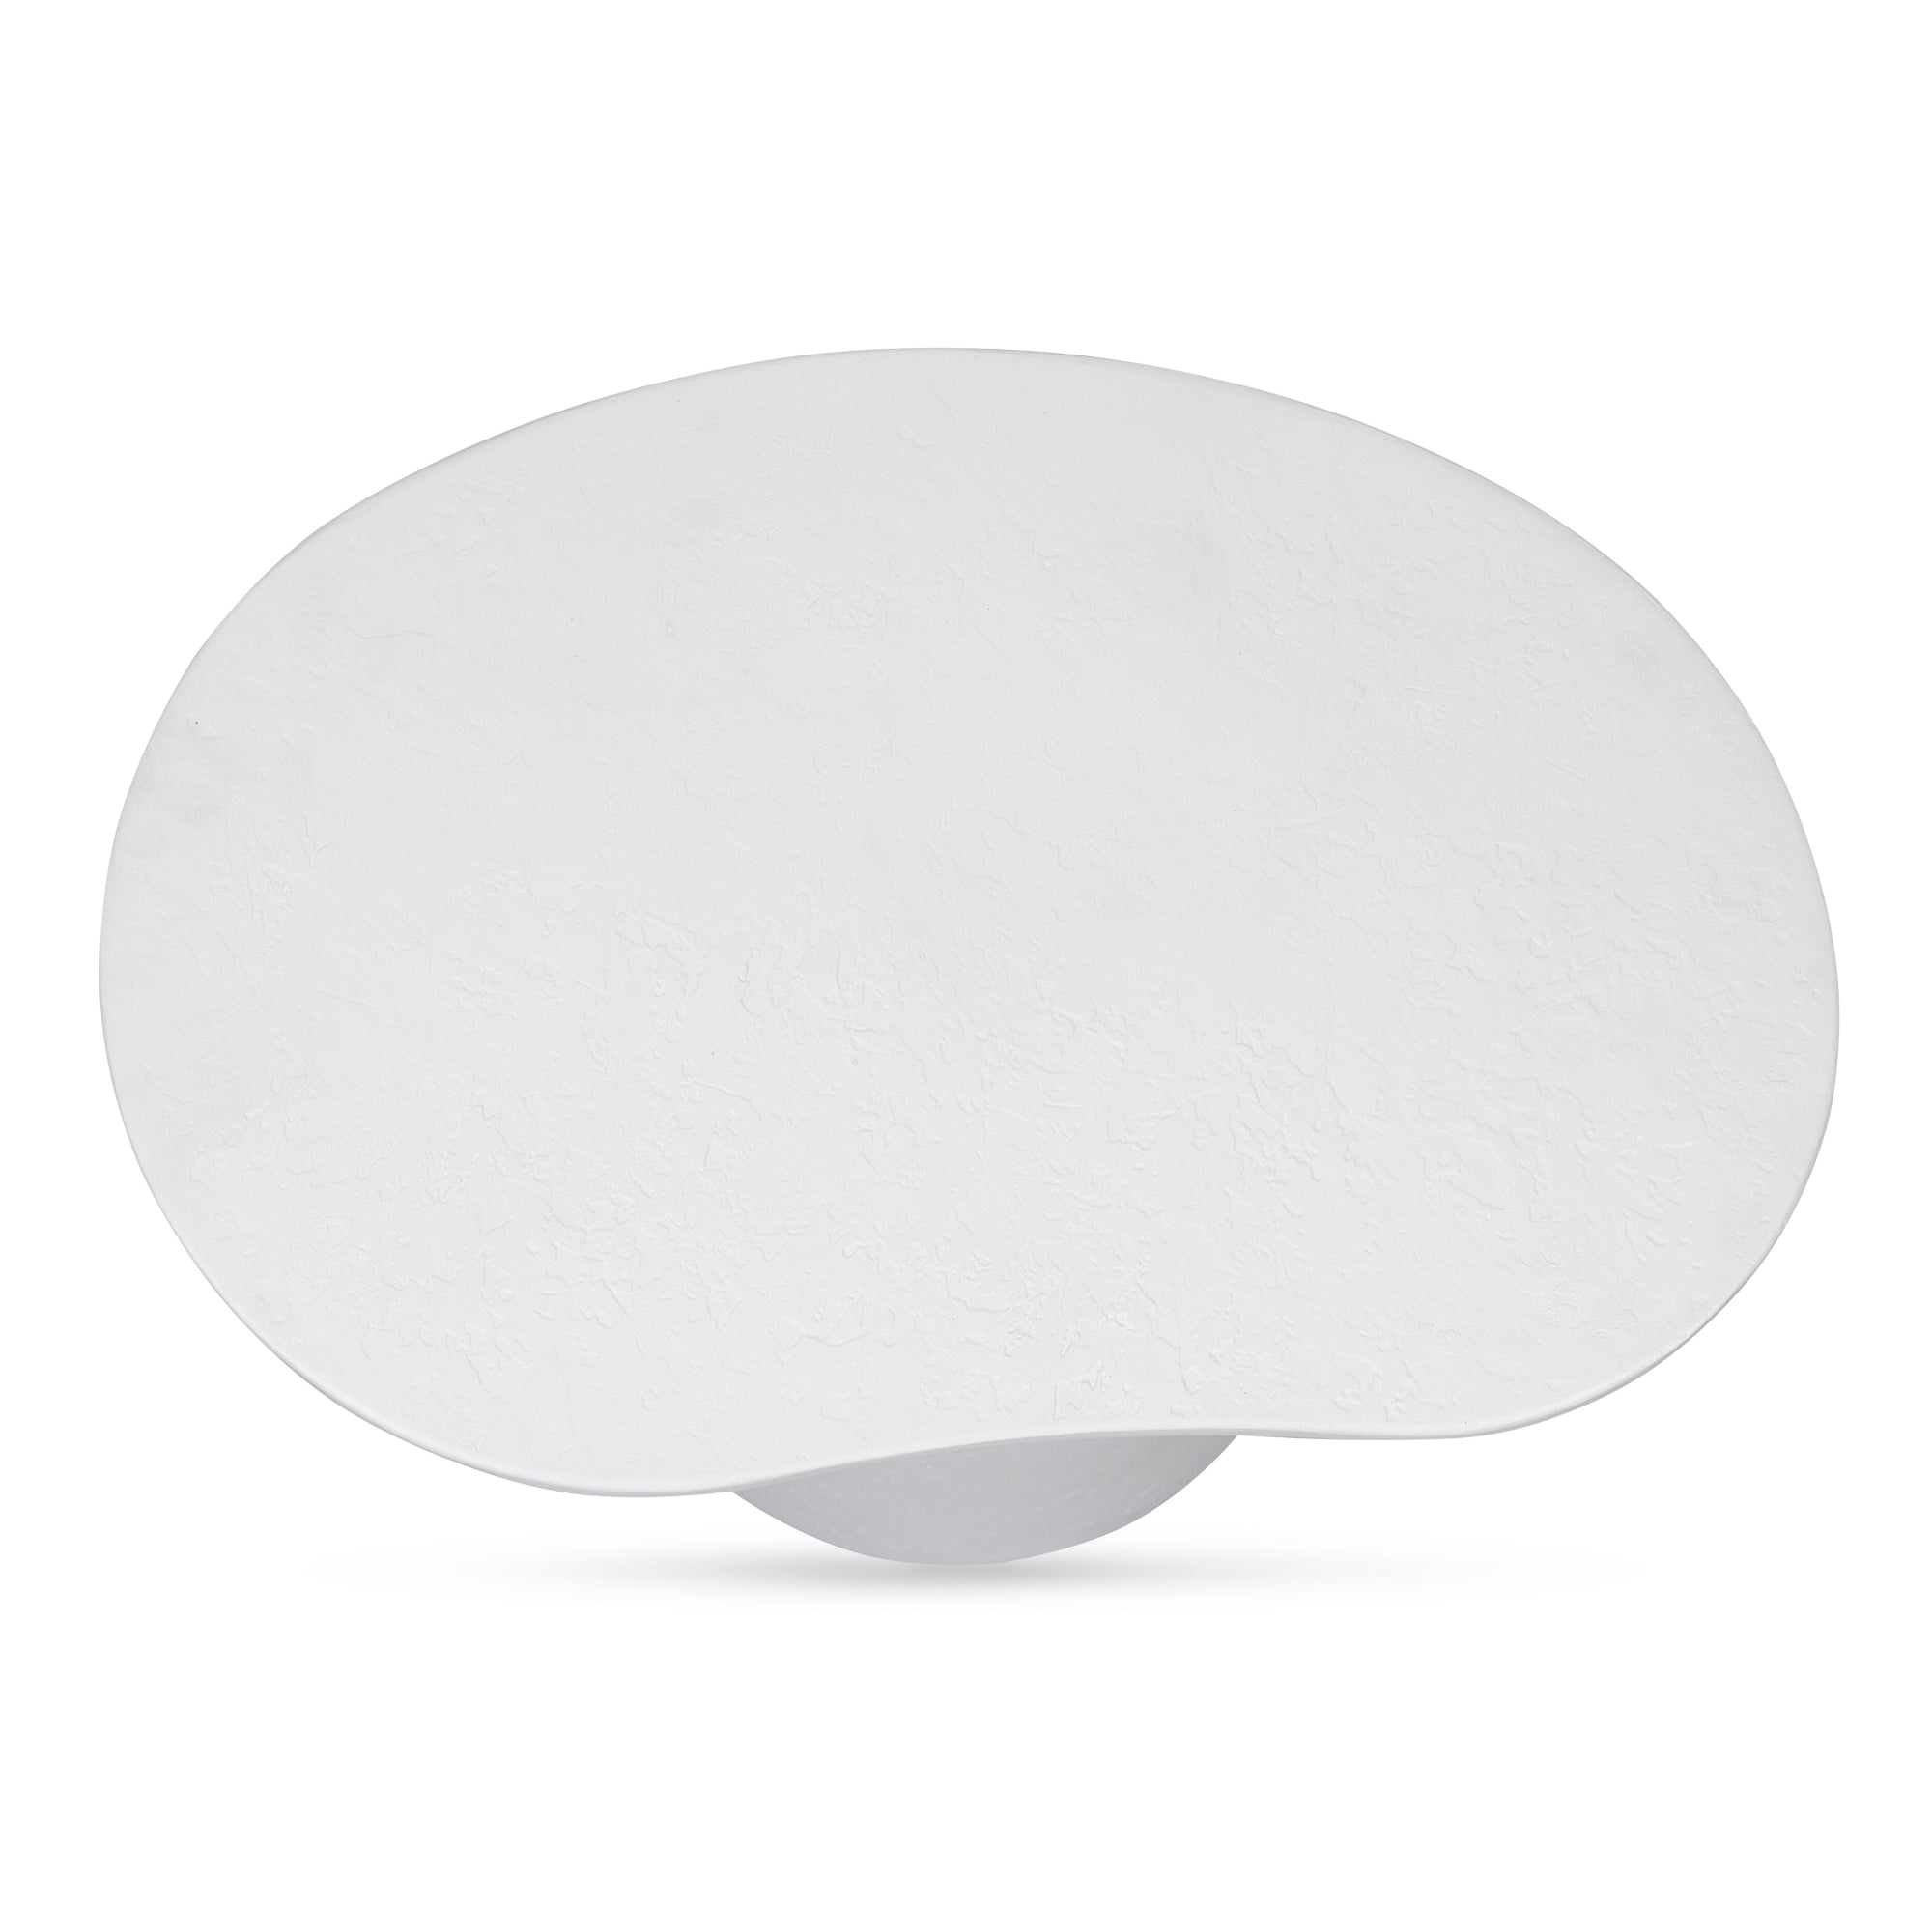 Yumi Outdoor Accent Table White